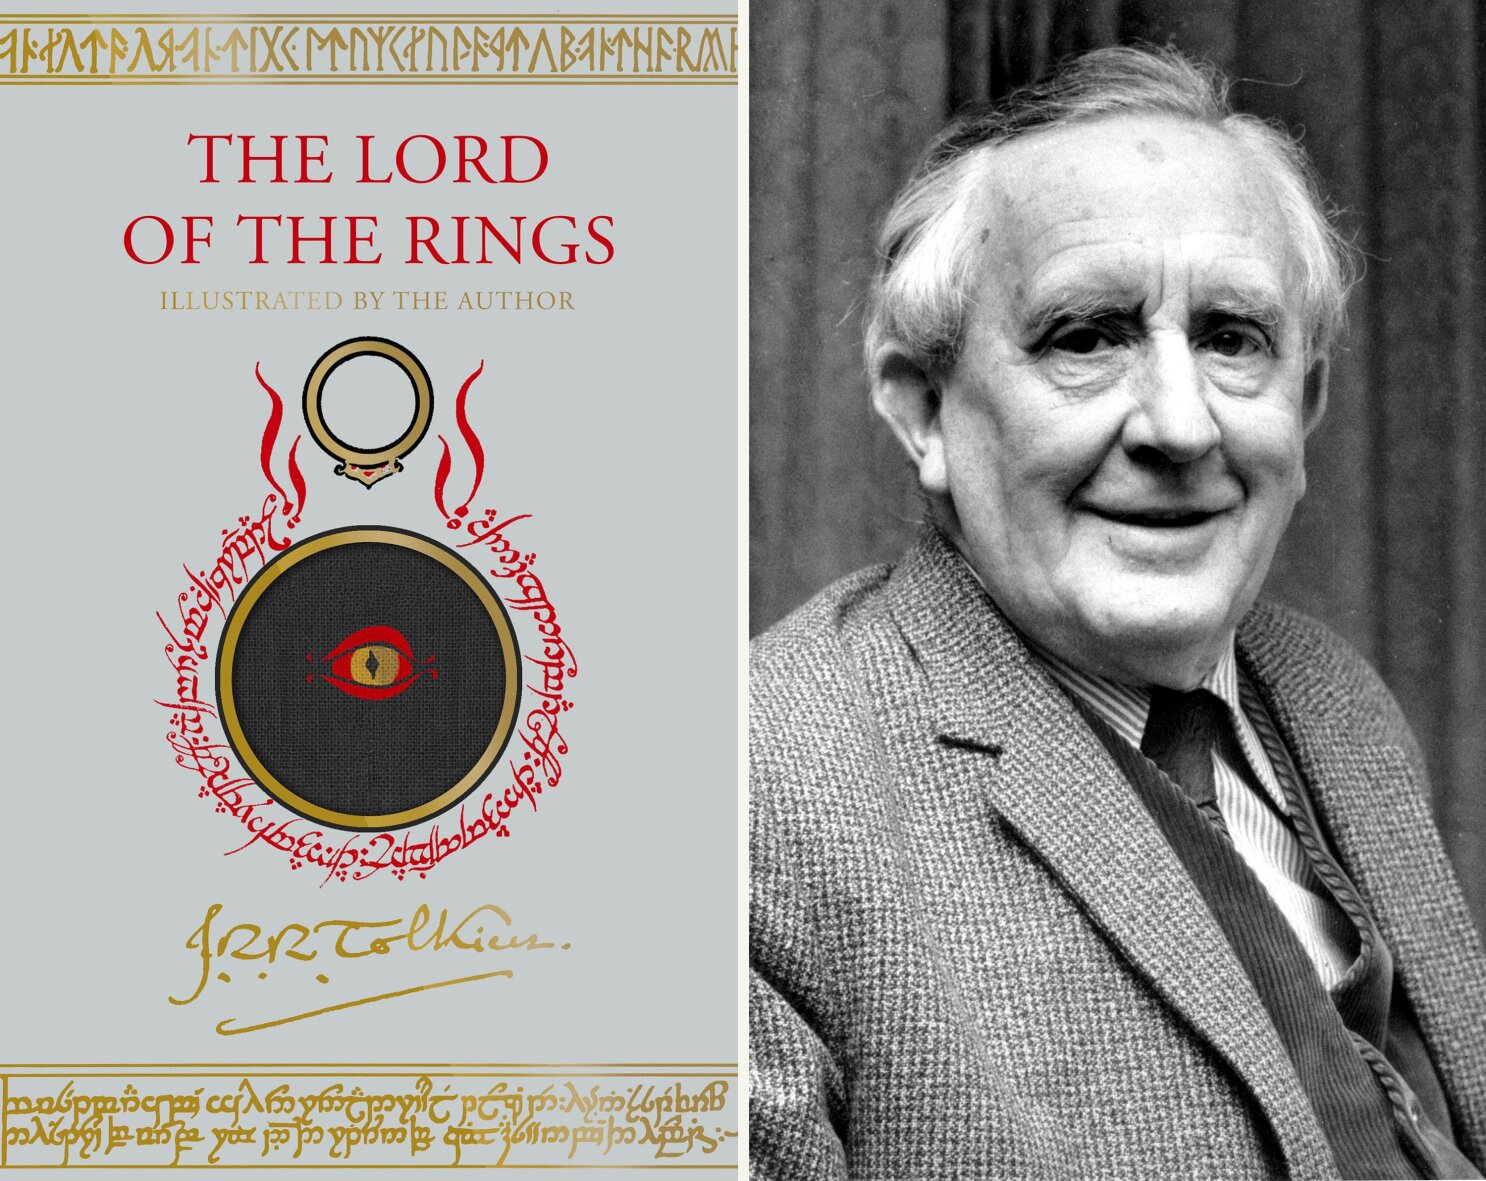 The One Ring  The Lord of the Rings, The Hobbit, and J.R.R Tolkien Podcast